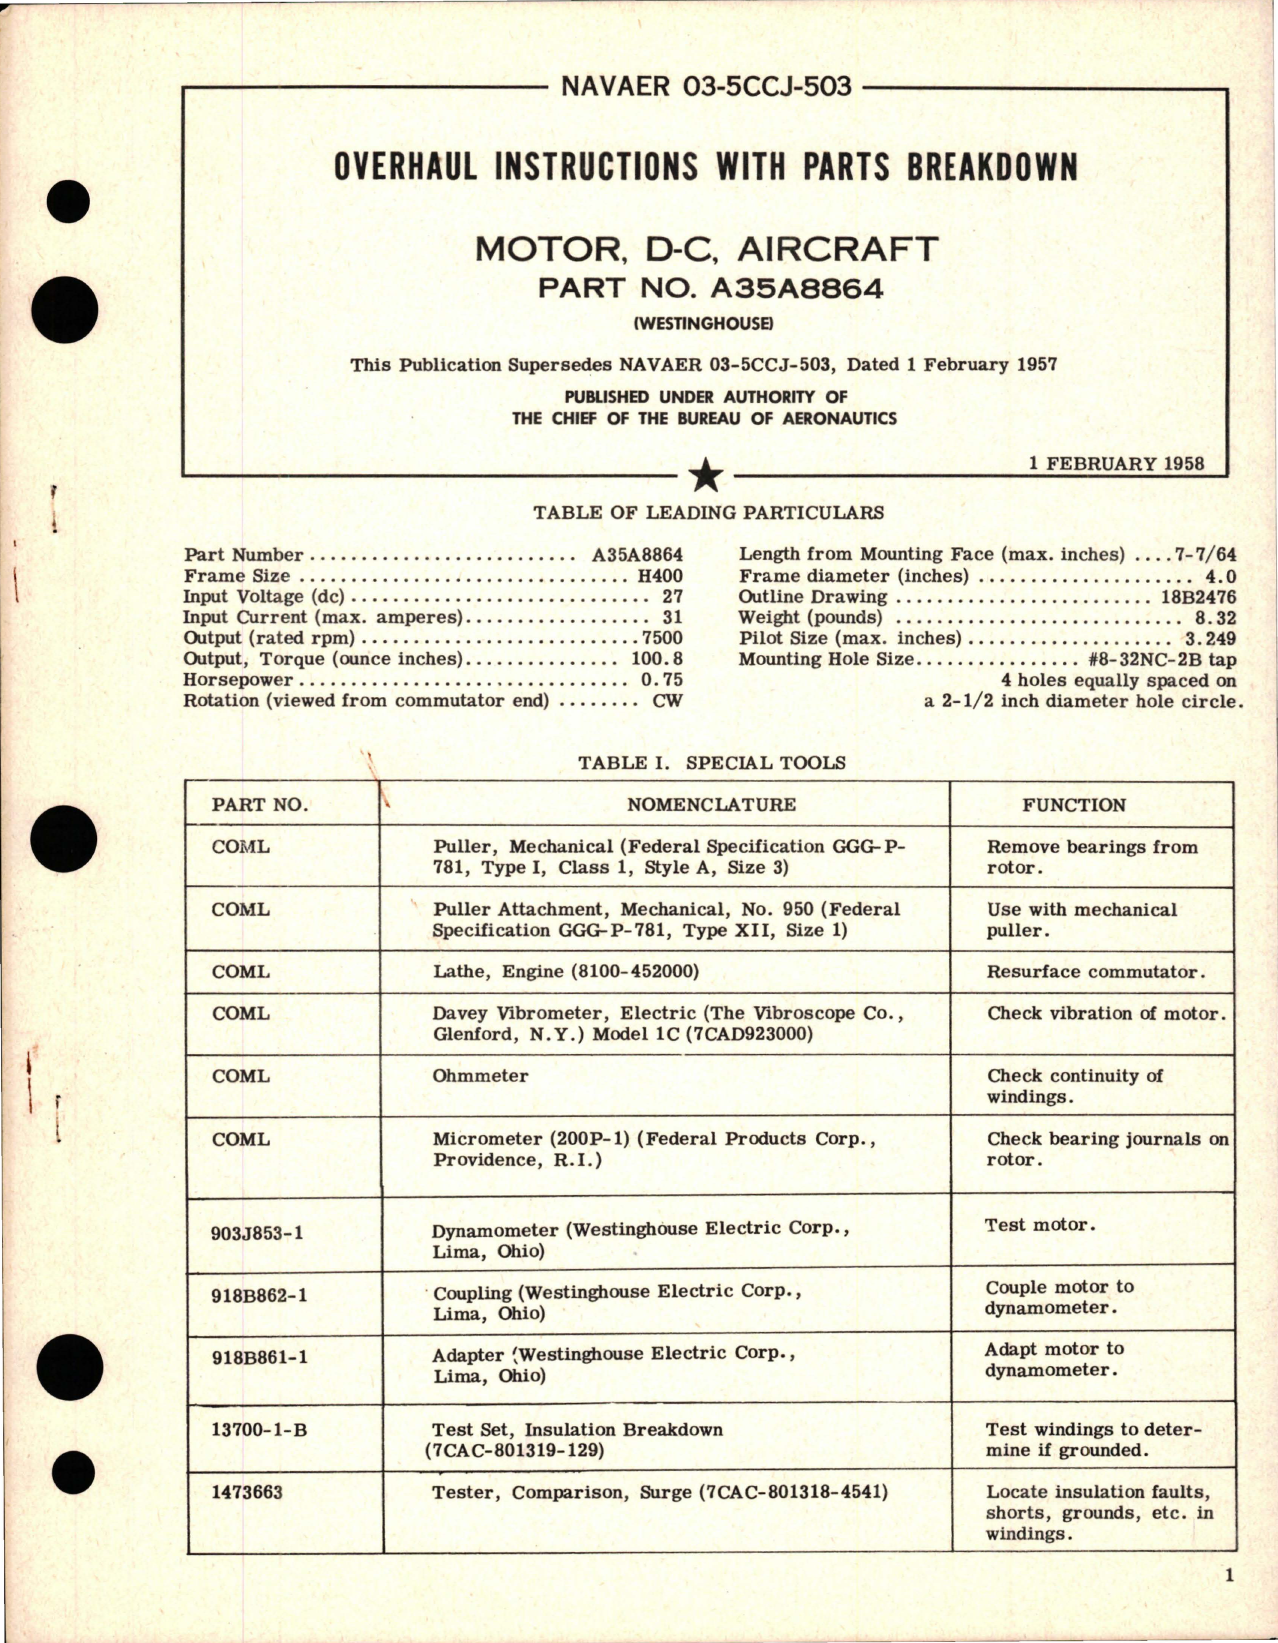 Sample page 1 from AirCorps Library document: Overhaul Instructions with Parts Breakdown for D-C Motor - Part A35A8864